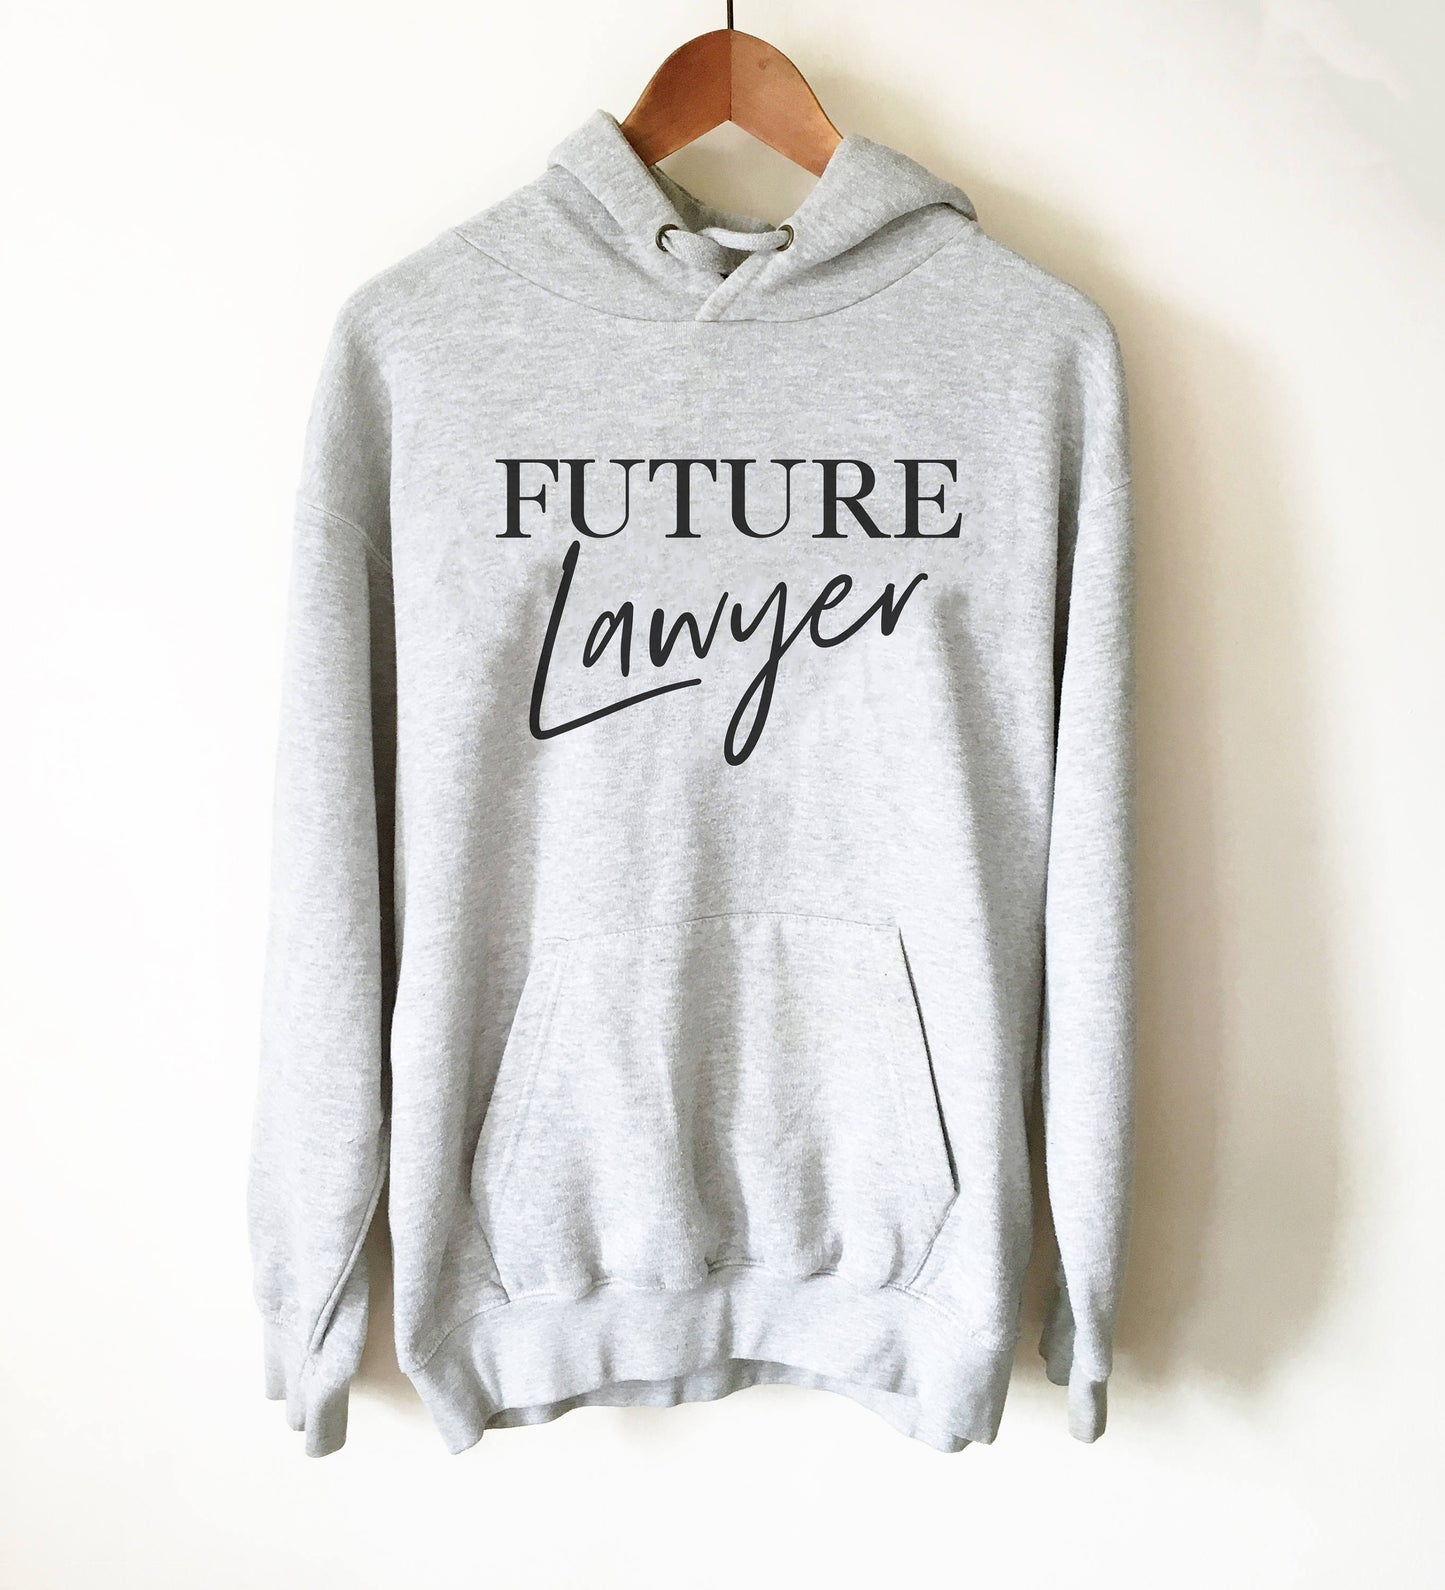 Future Lawyer Hoodie - Lawyer Shirt, Lawyer Gift, Law School, College Student Gift, Law Student, Graduation Gift